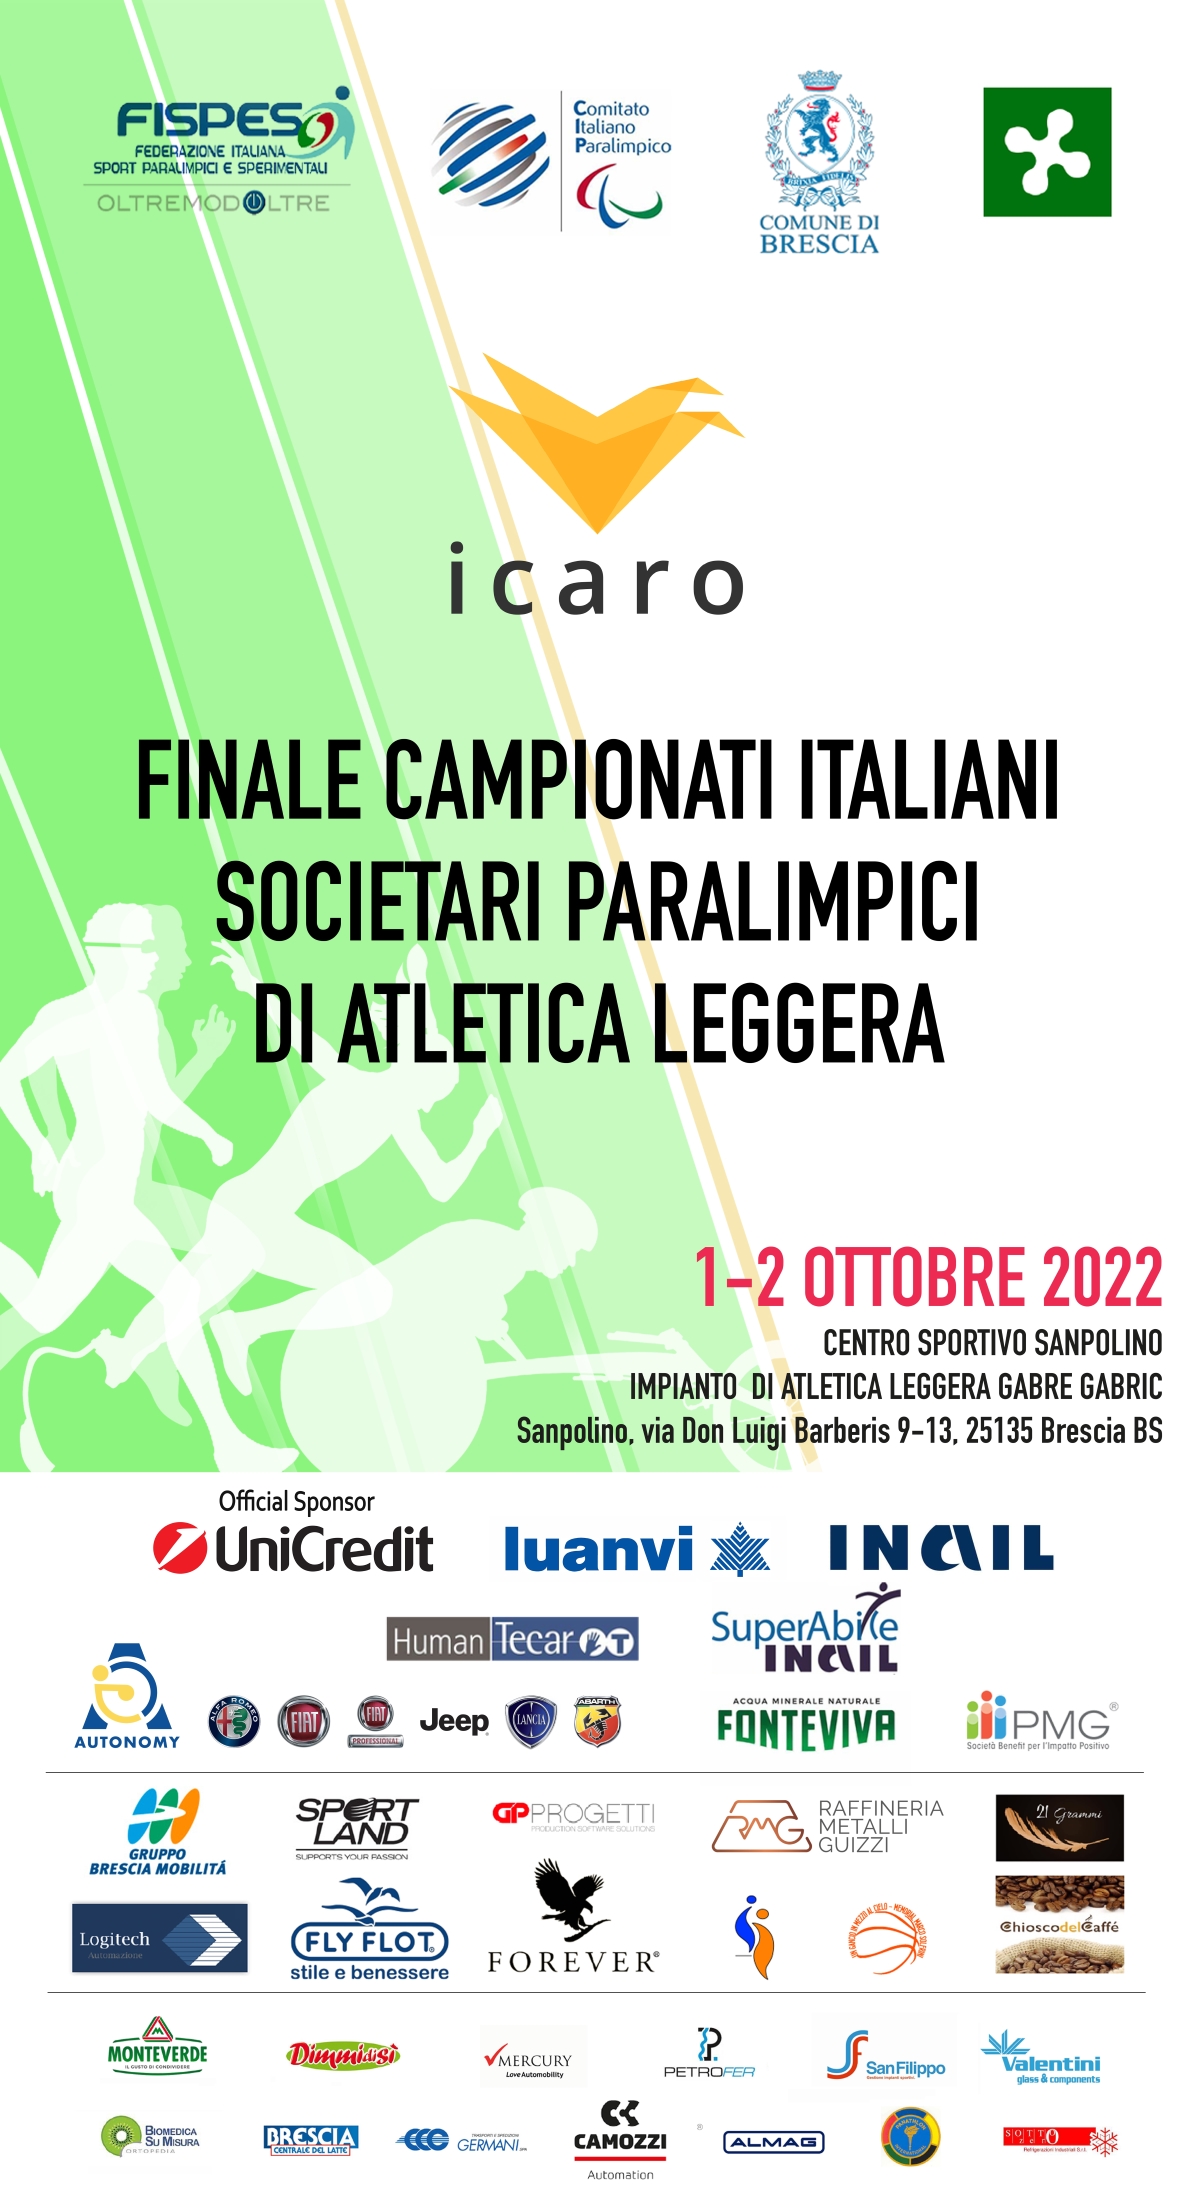 save_the_date_finals_of_italian_paralympic_championships_source_icaro_onlus.jpg